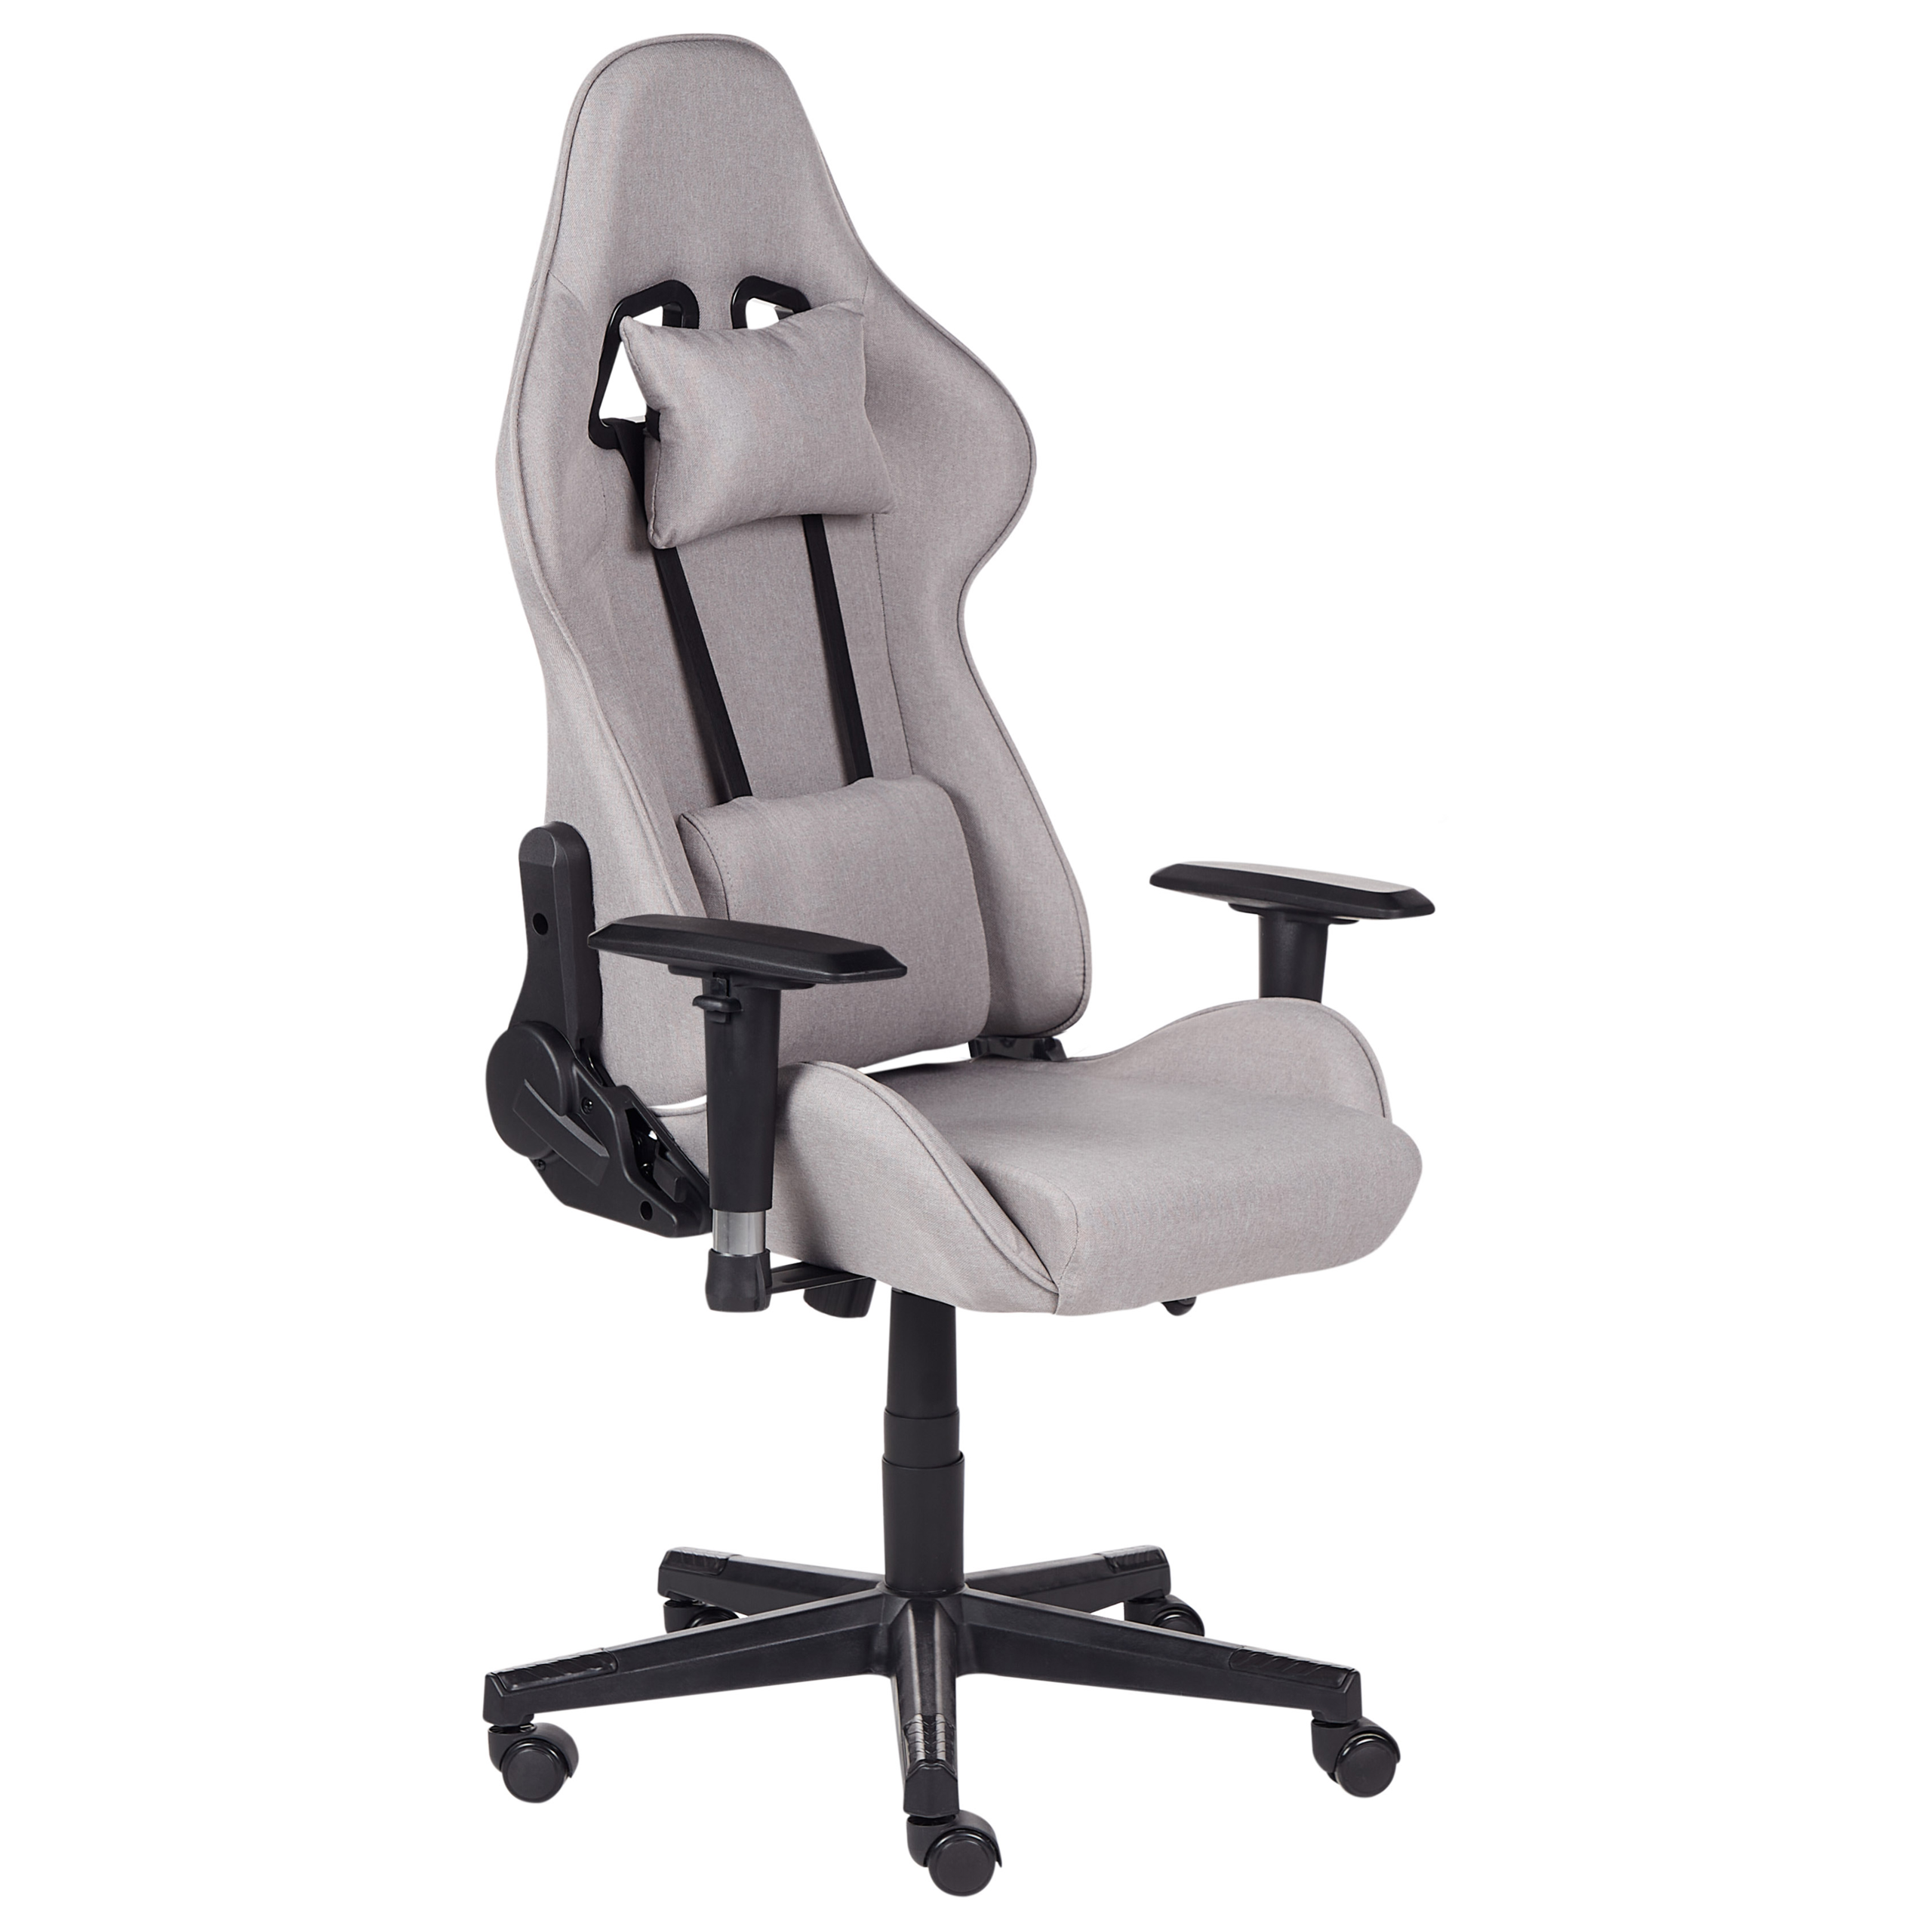 Photos - Computer Chair Beliani Gaming Chair Light Grey Fabric Swivel Adjustable Armrests and Heig 